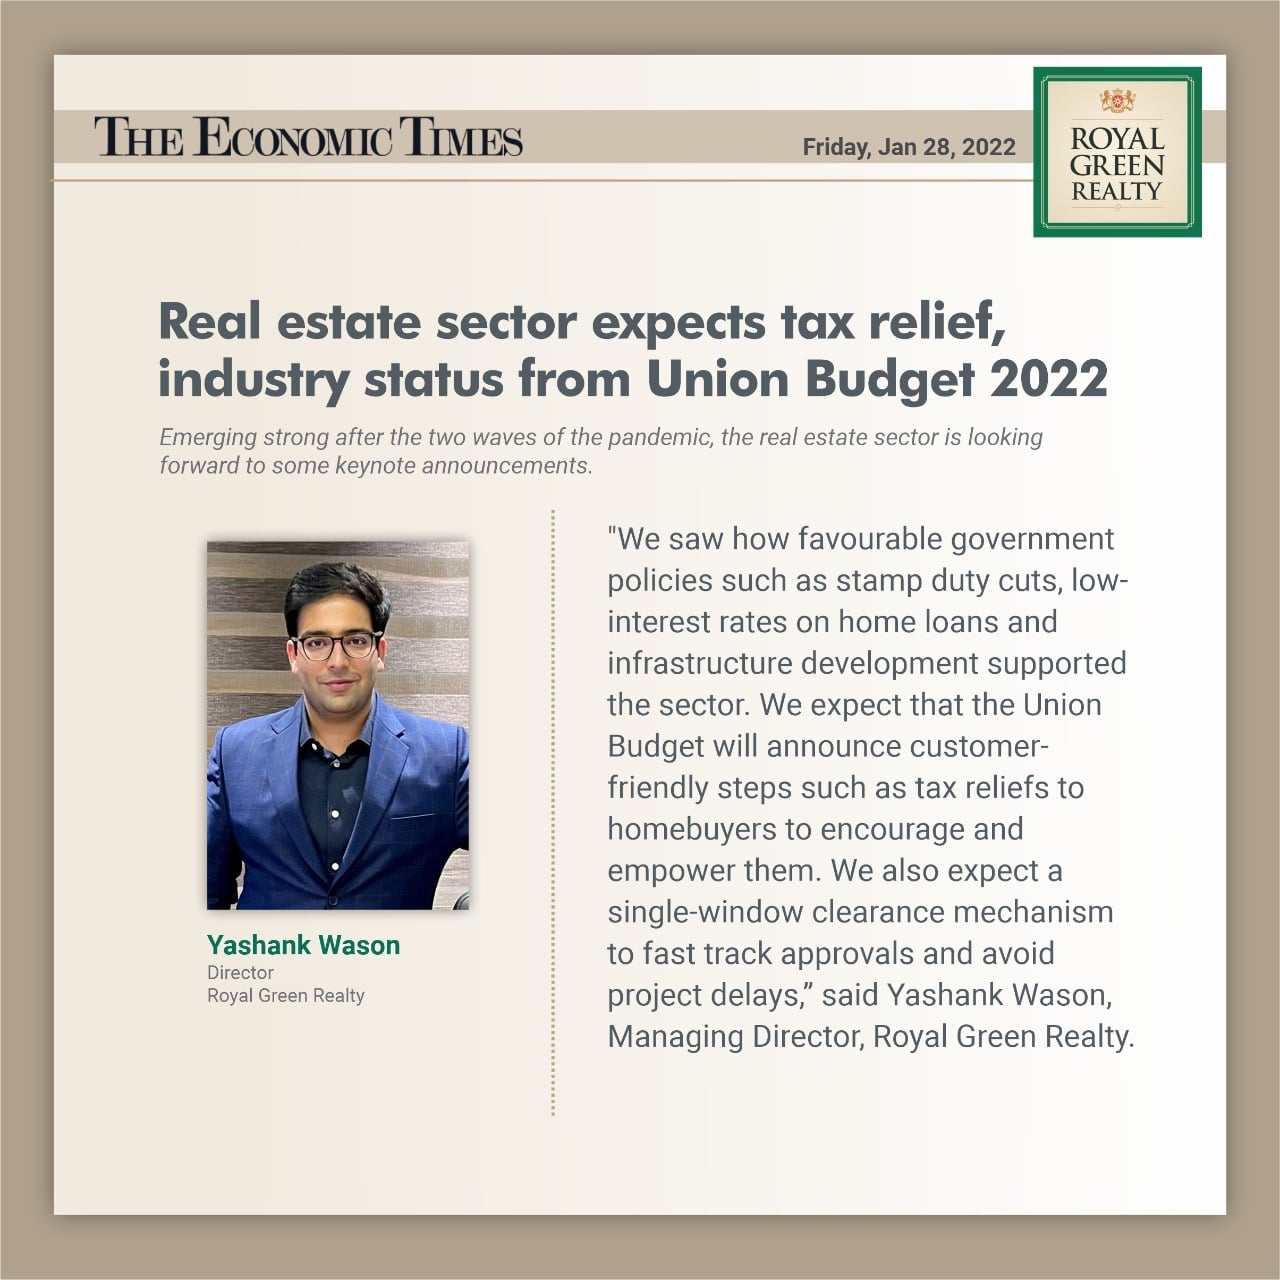 Real Estate sector expects tax relief industry status union budget 2022